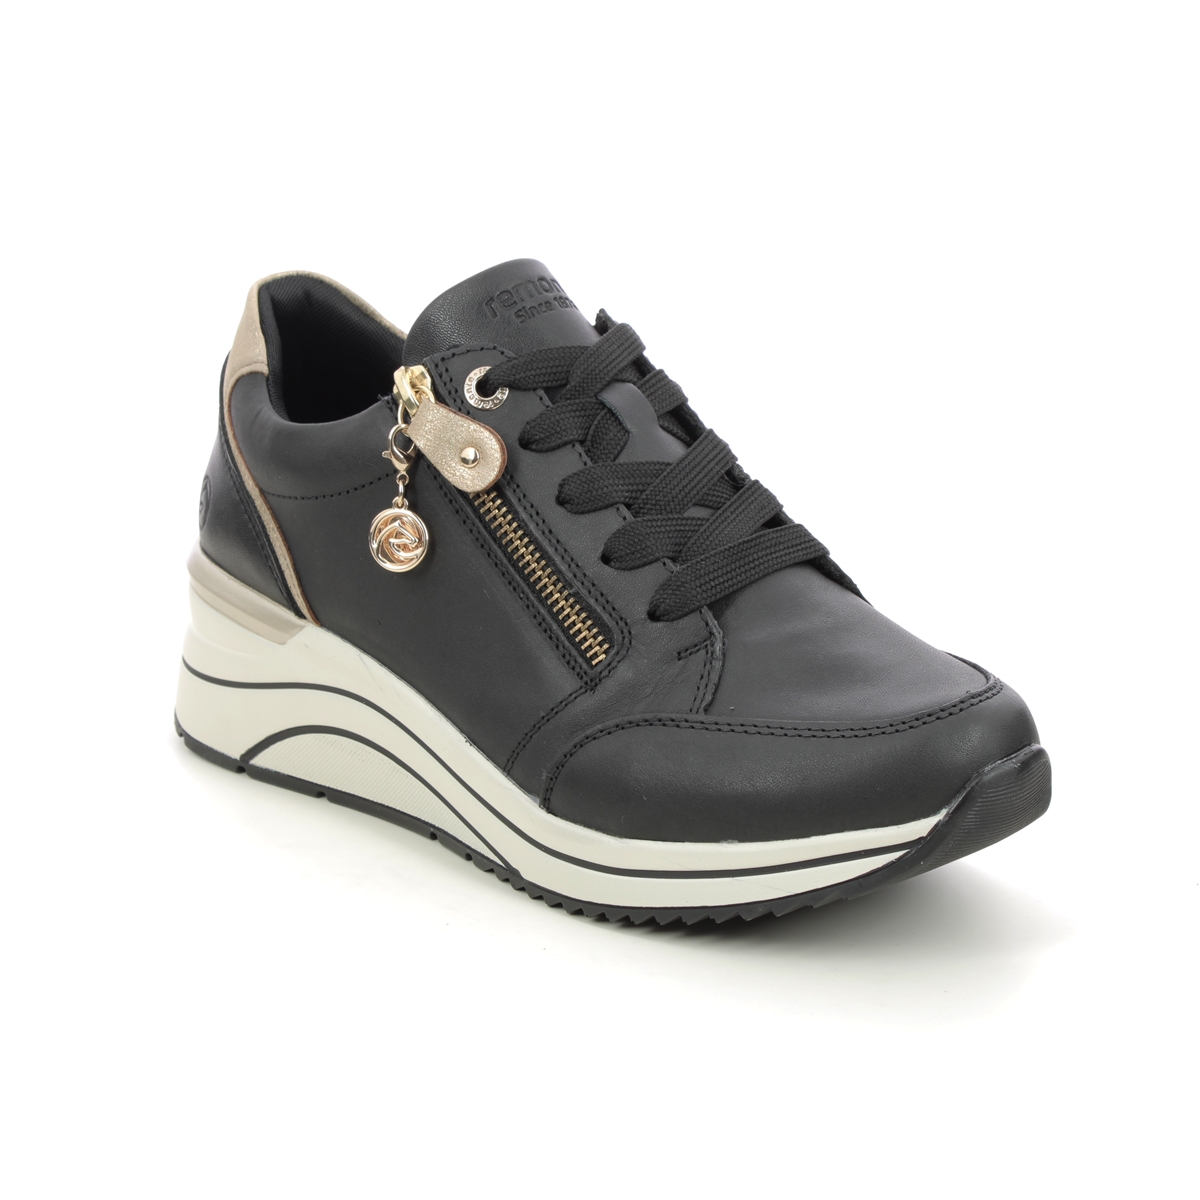 Remonte Ranzip Wedge Black Leather Womens Trainers D0T03-01 In Size 36 In Plain Black Leather